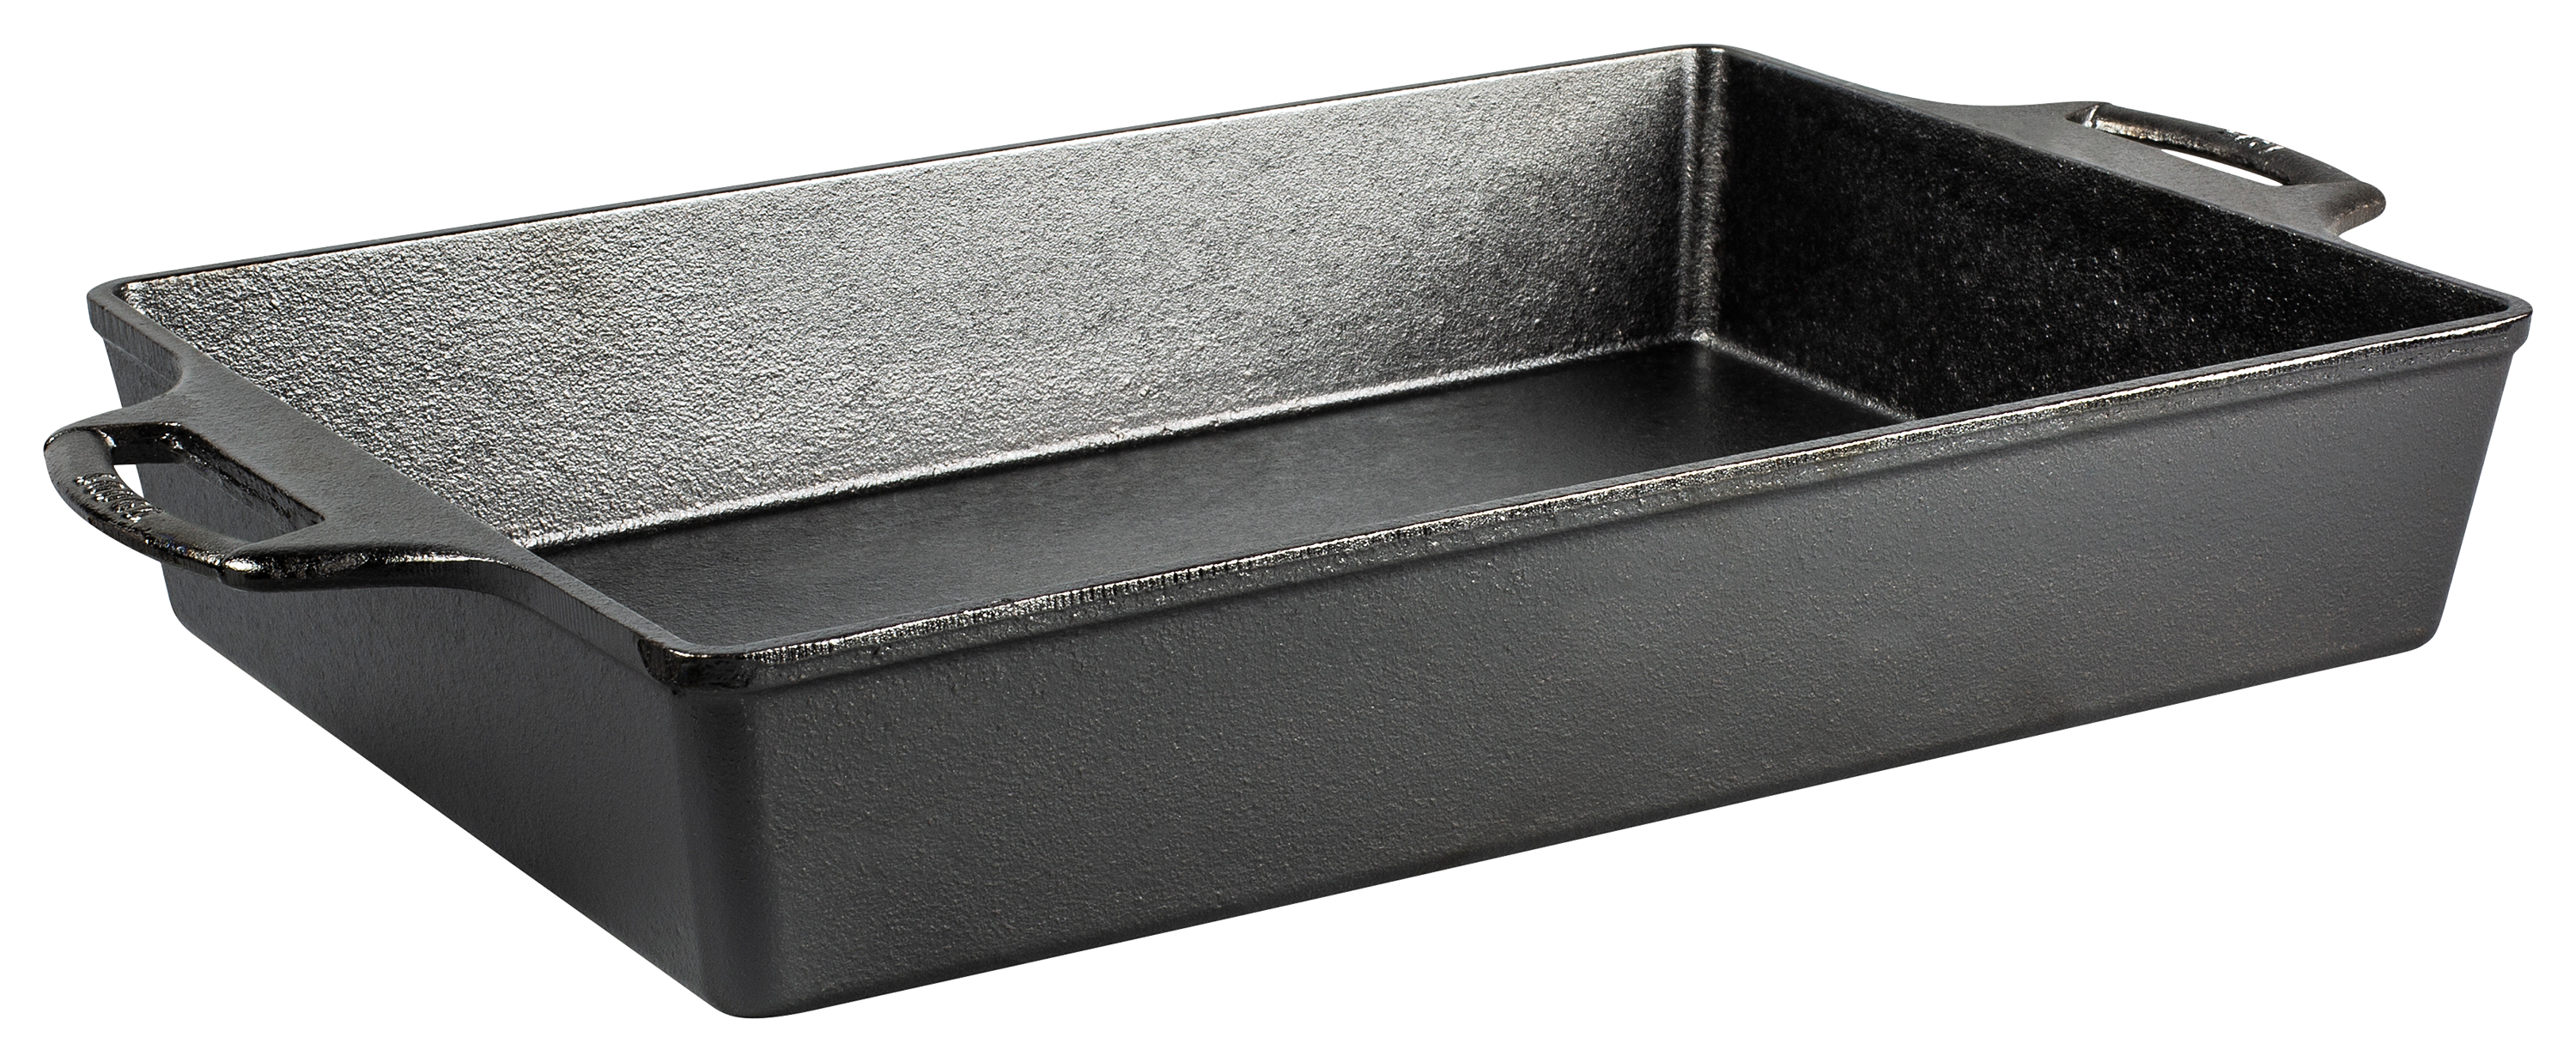 BW6MFN Lodge Muffin Pan, 12-7/10in.W x 7in.D 1-1/2i